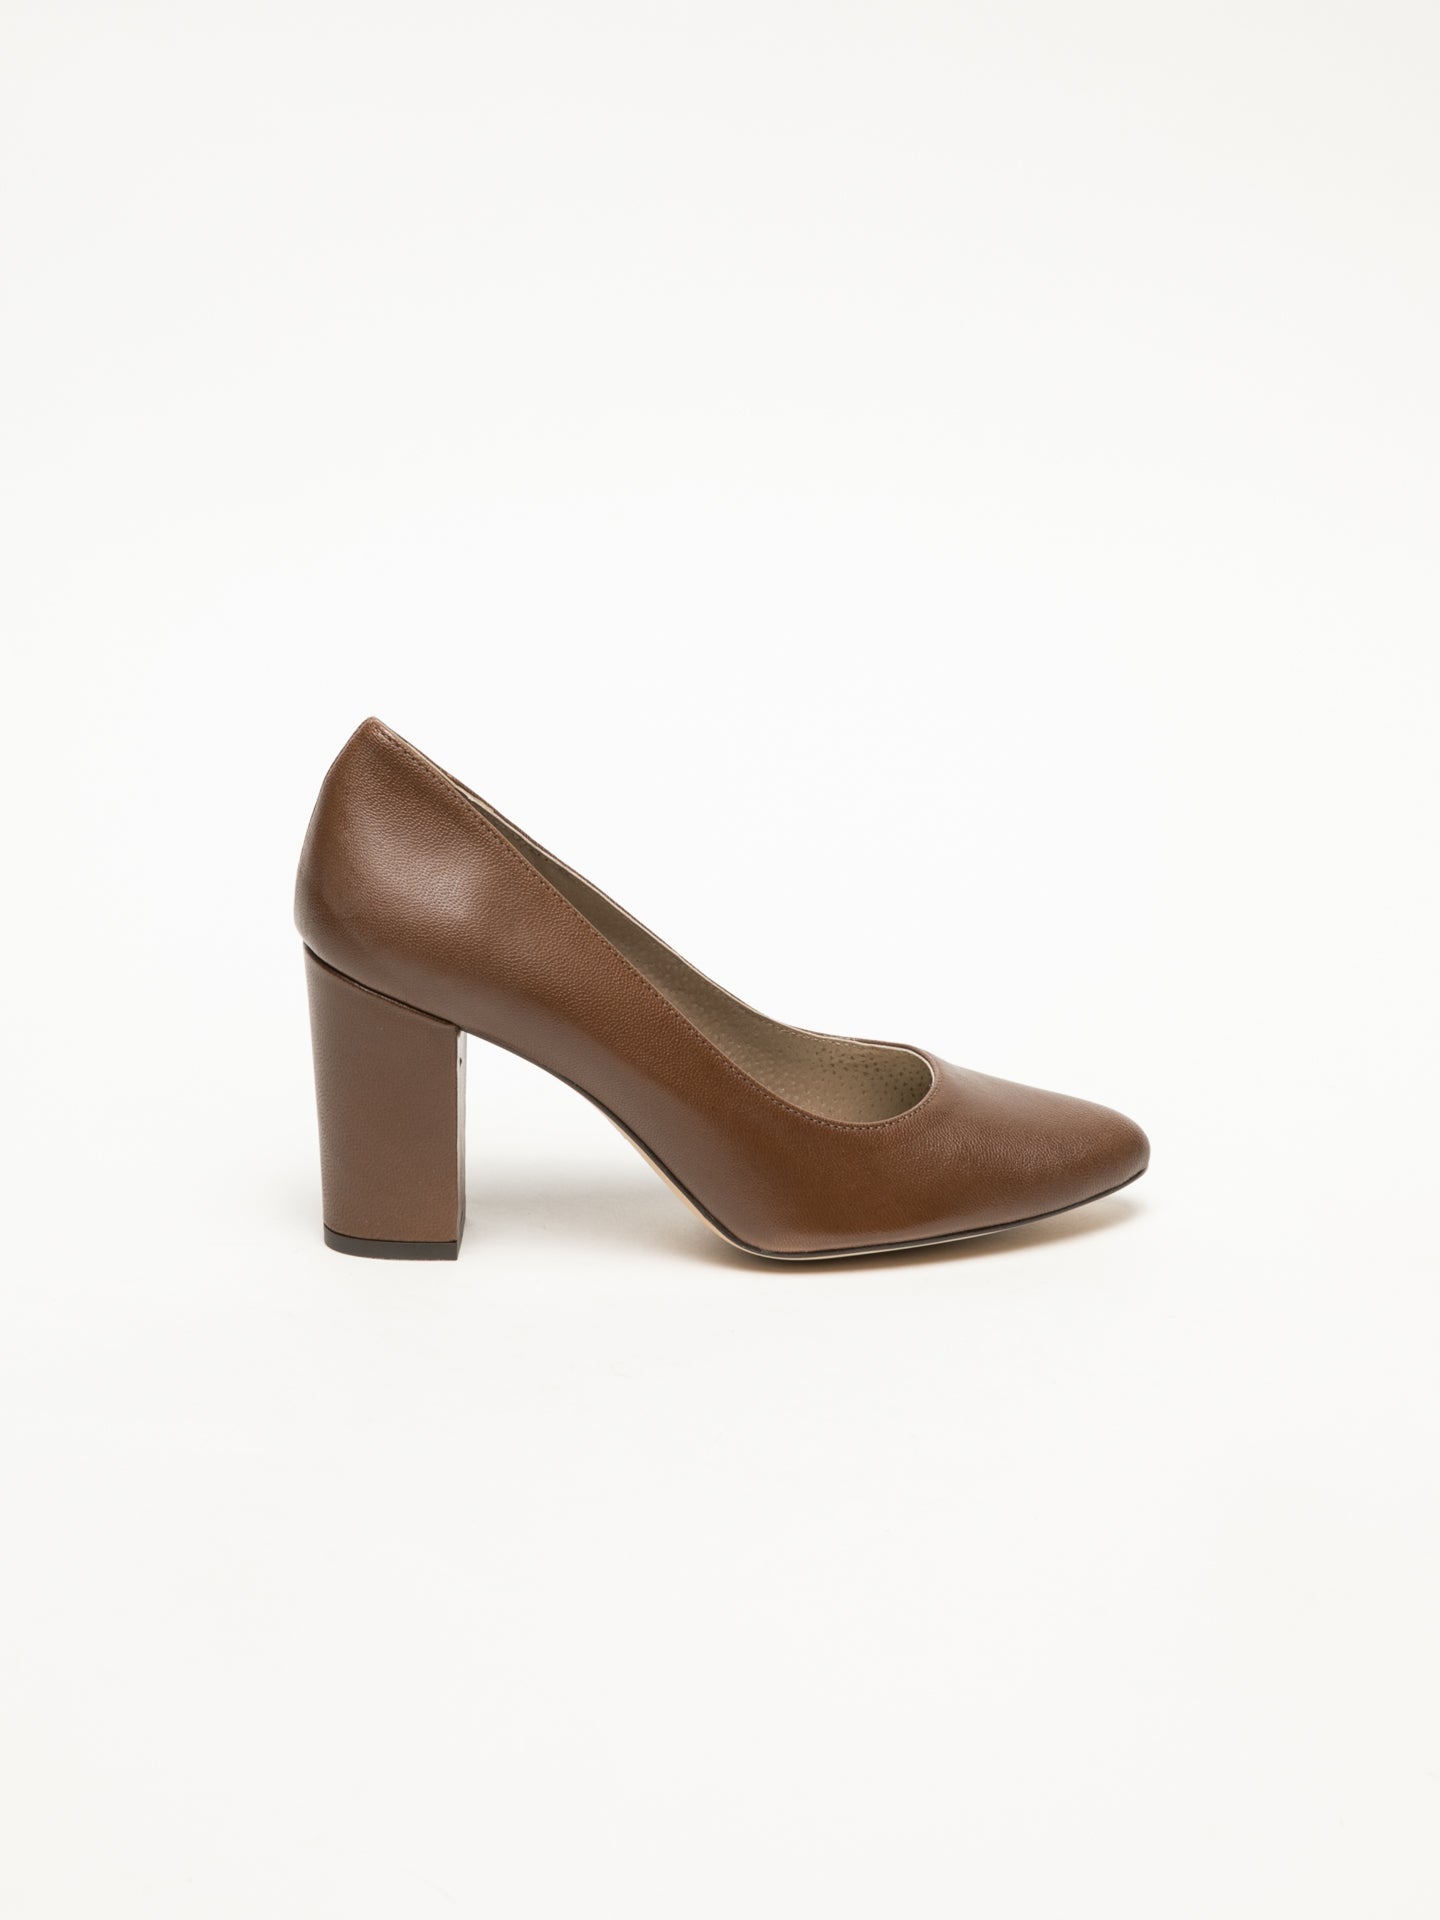 Foreva Brown Classic Pumps Shoes